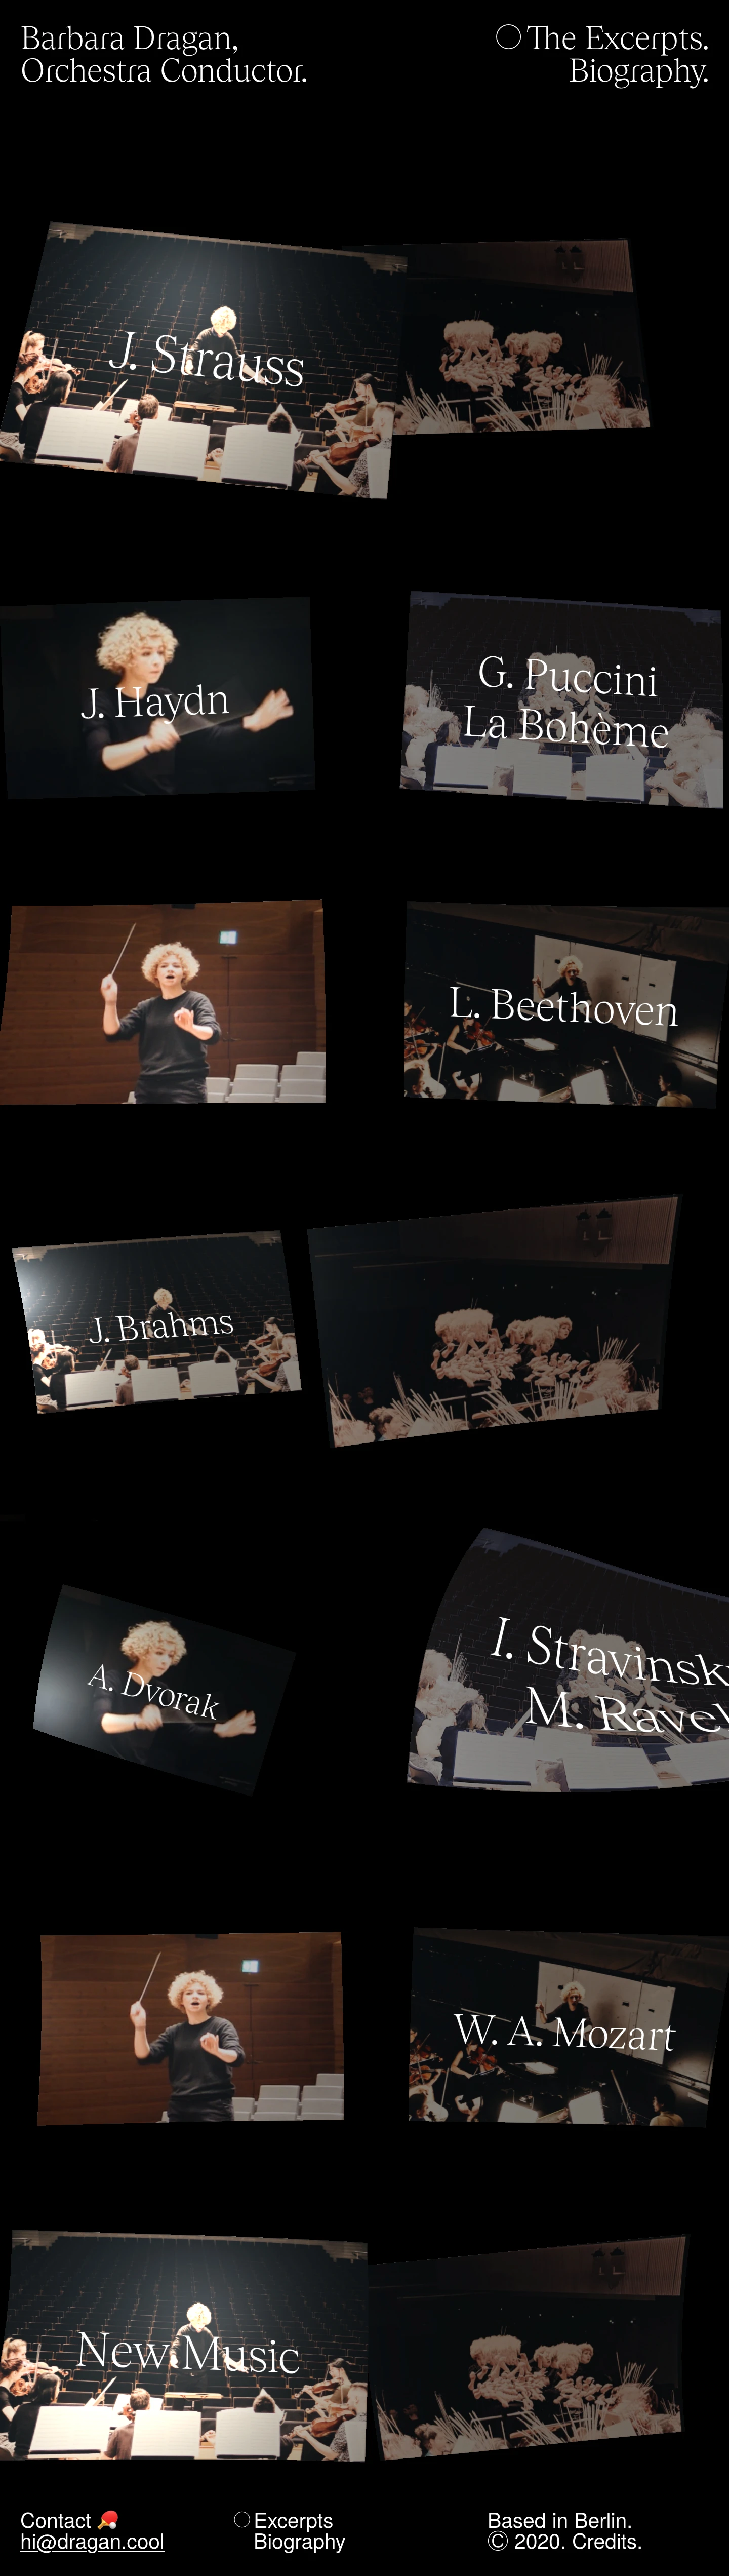 Barbara Dragan Landing Page Example: Barbara is a award recipient of the Marin Alsop Taki Concordia Conducting Fellowship and the German DAAD Scholarship. She conducted several professional orchestras such as the Magdeburgische Philharmonie, Kammerakademie Potsdam, Bochumer Symphoniker, Polish Radio Orchestra, Sinfonietta Cracovia, Festival Orchestra Wien...